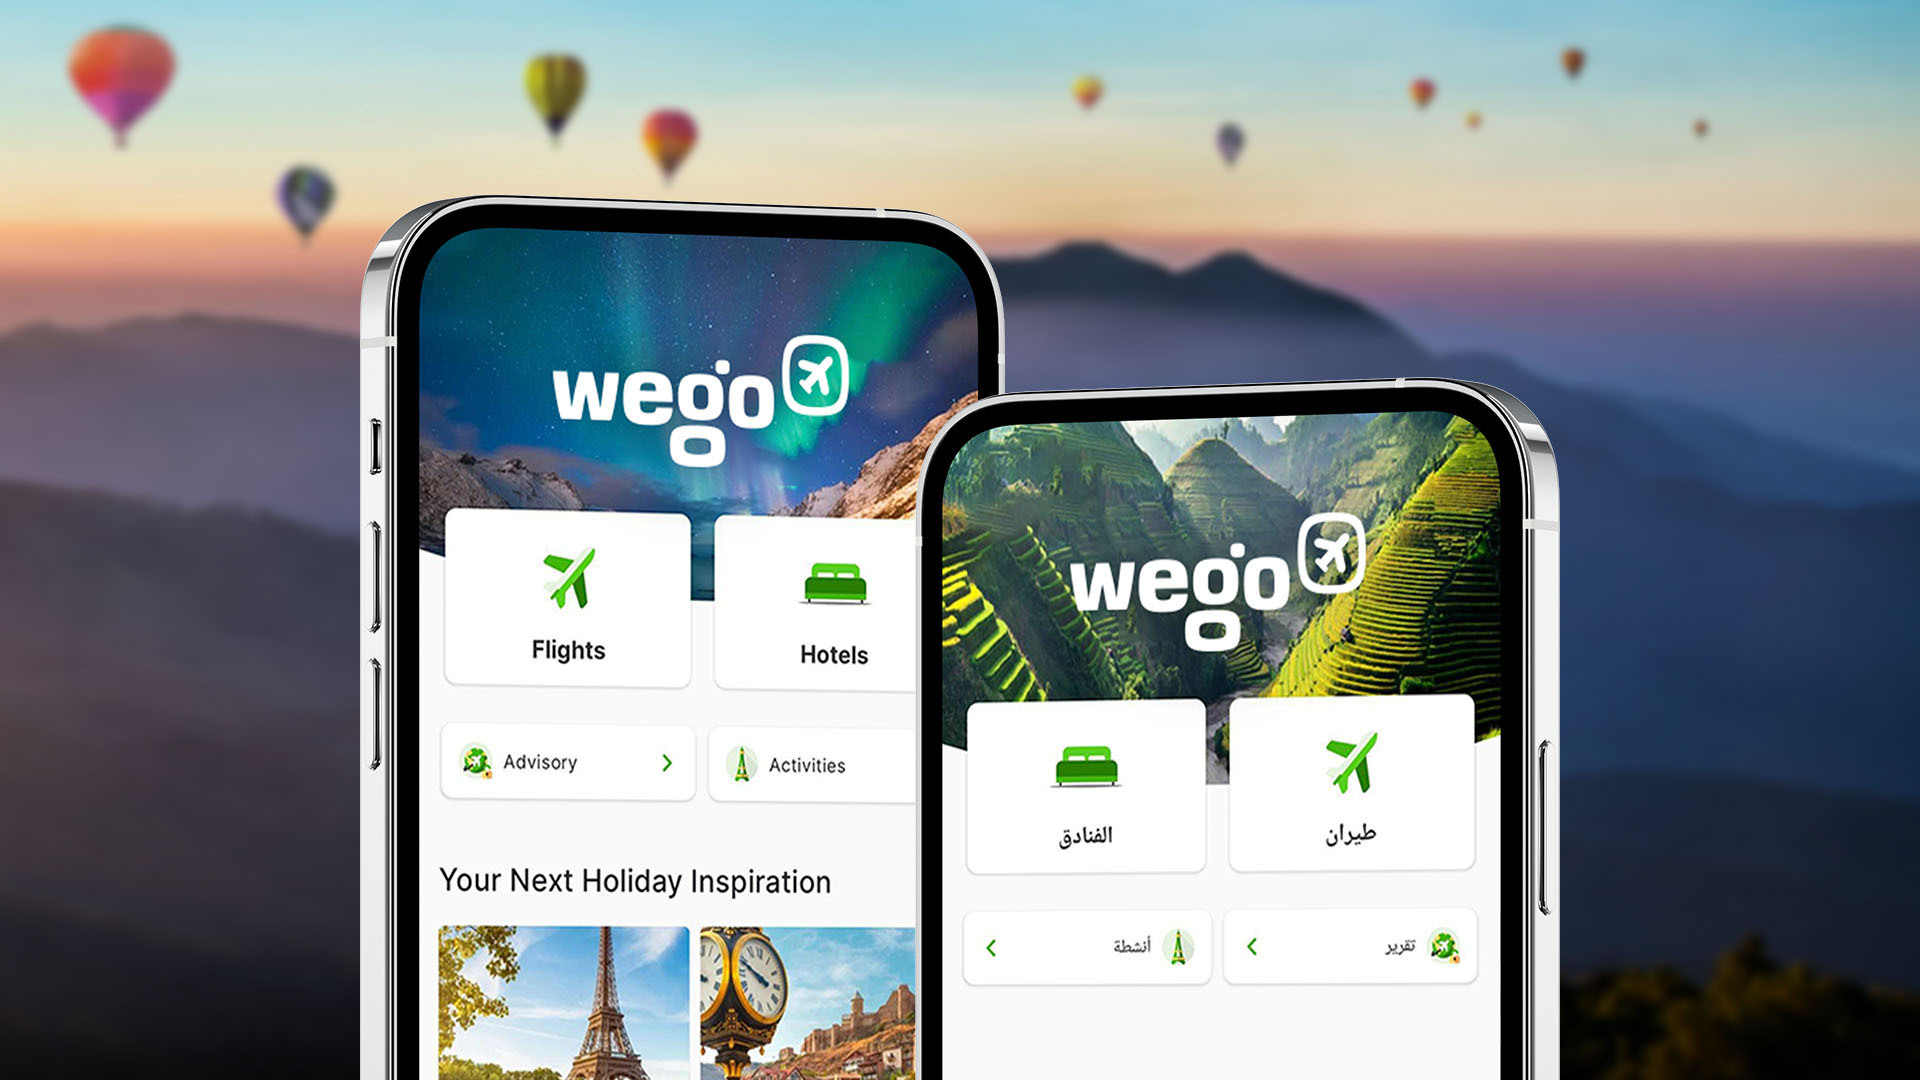 WEGO NAMED THE 1 TRAVEL APP FOR FLIGHT SEARCHES AND BOOKINGS